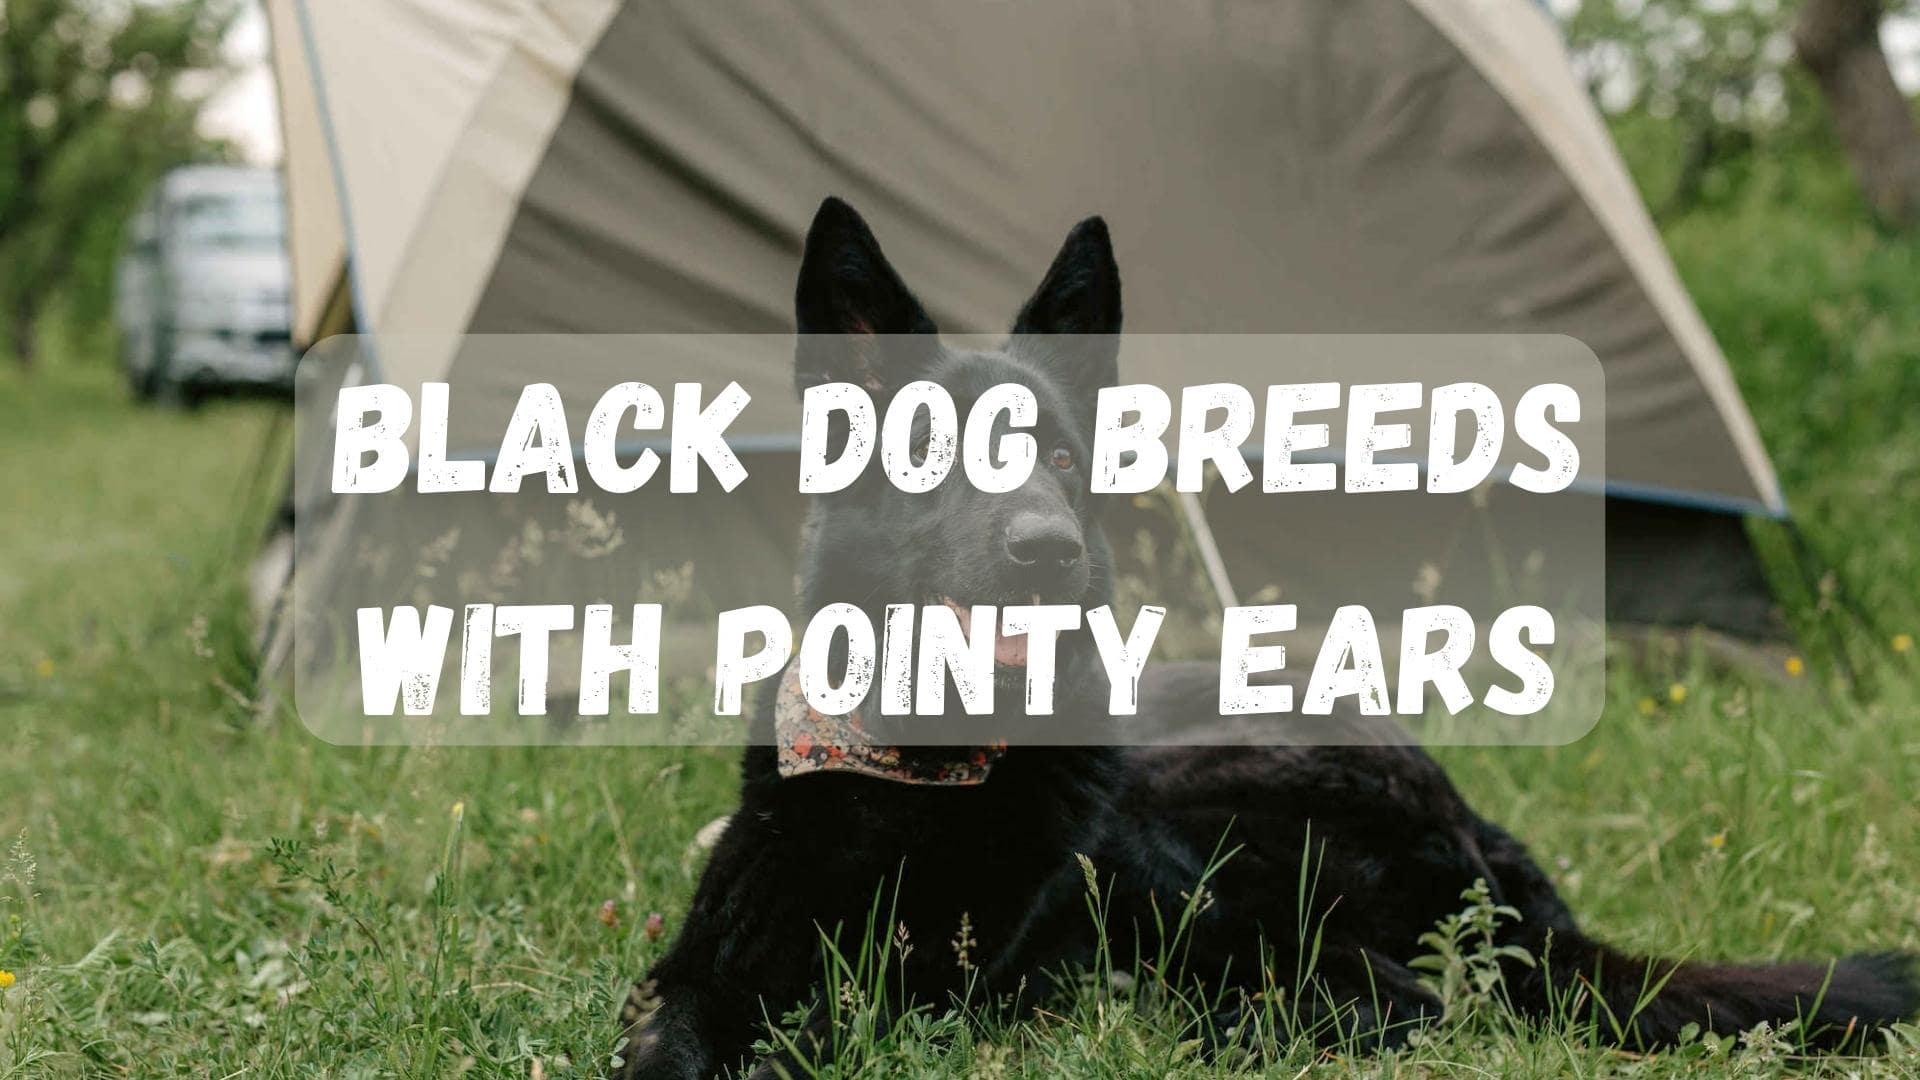 black dogs with pointy ears